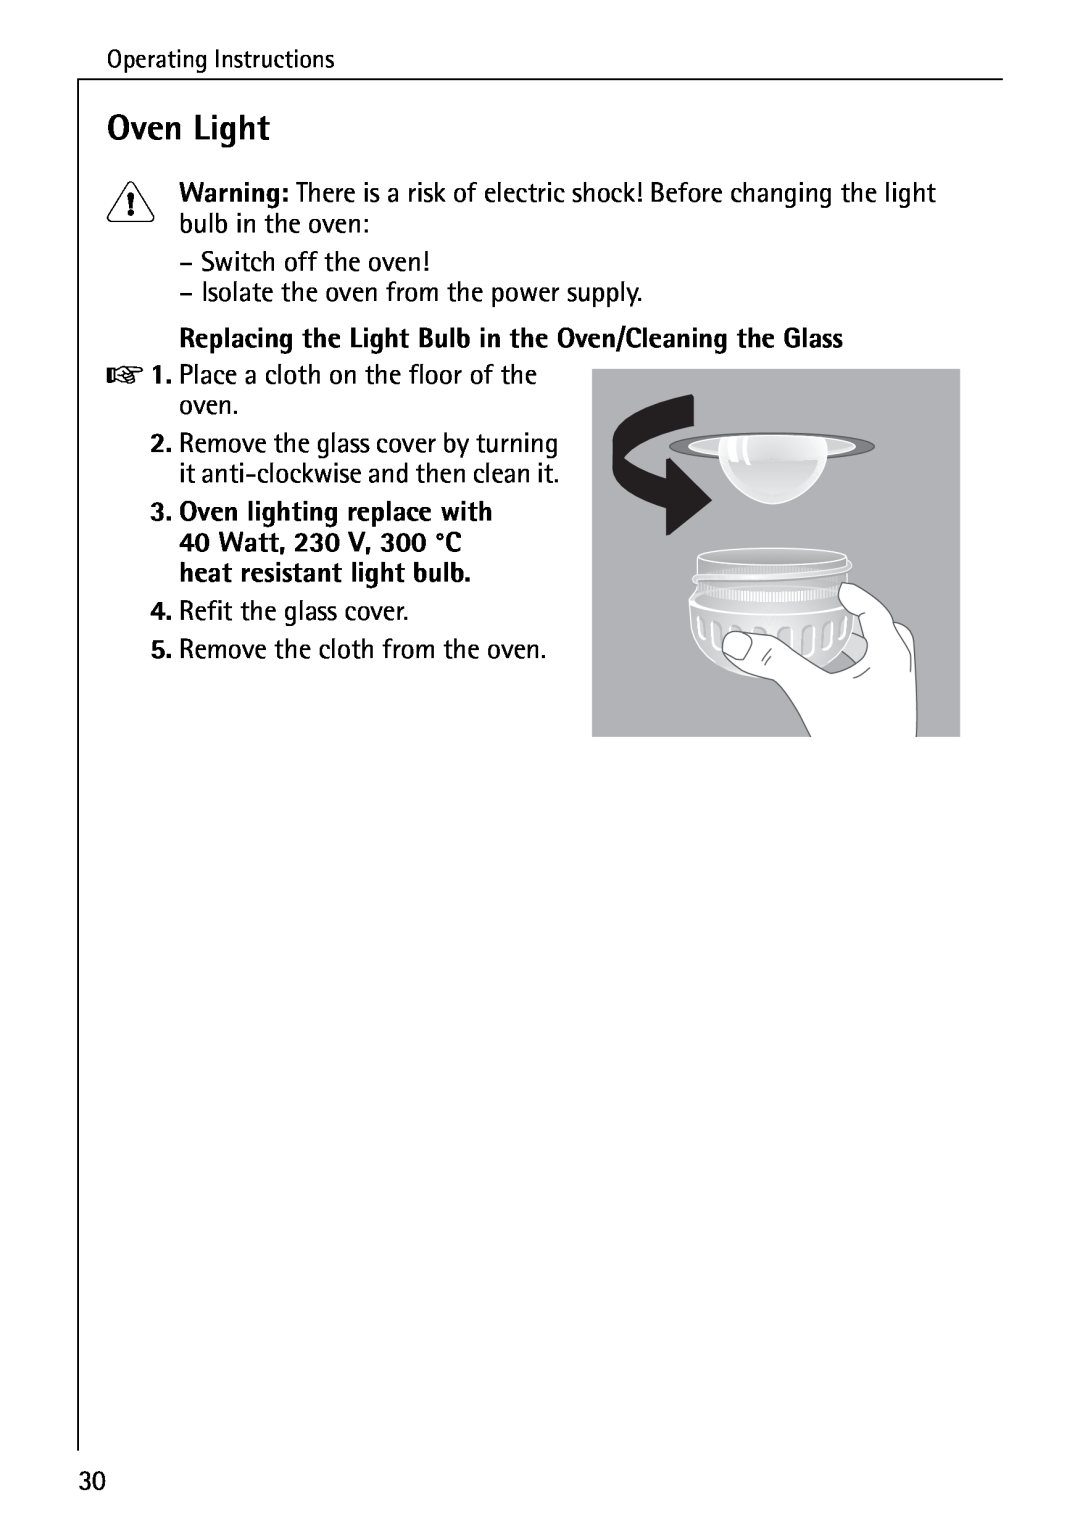 AEG 2003 F Oven Light, bulb in the oven, Replacing the Light Bulb in the Oven/Cleaning the Glass, Operating Instructions 